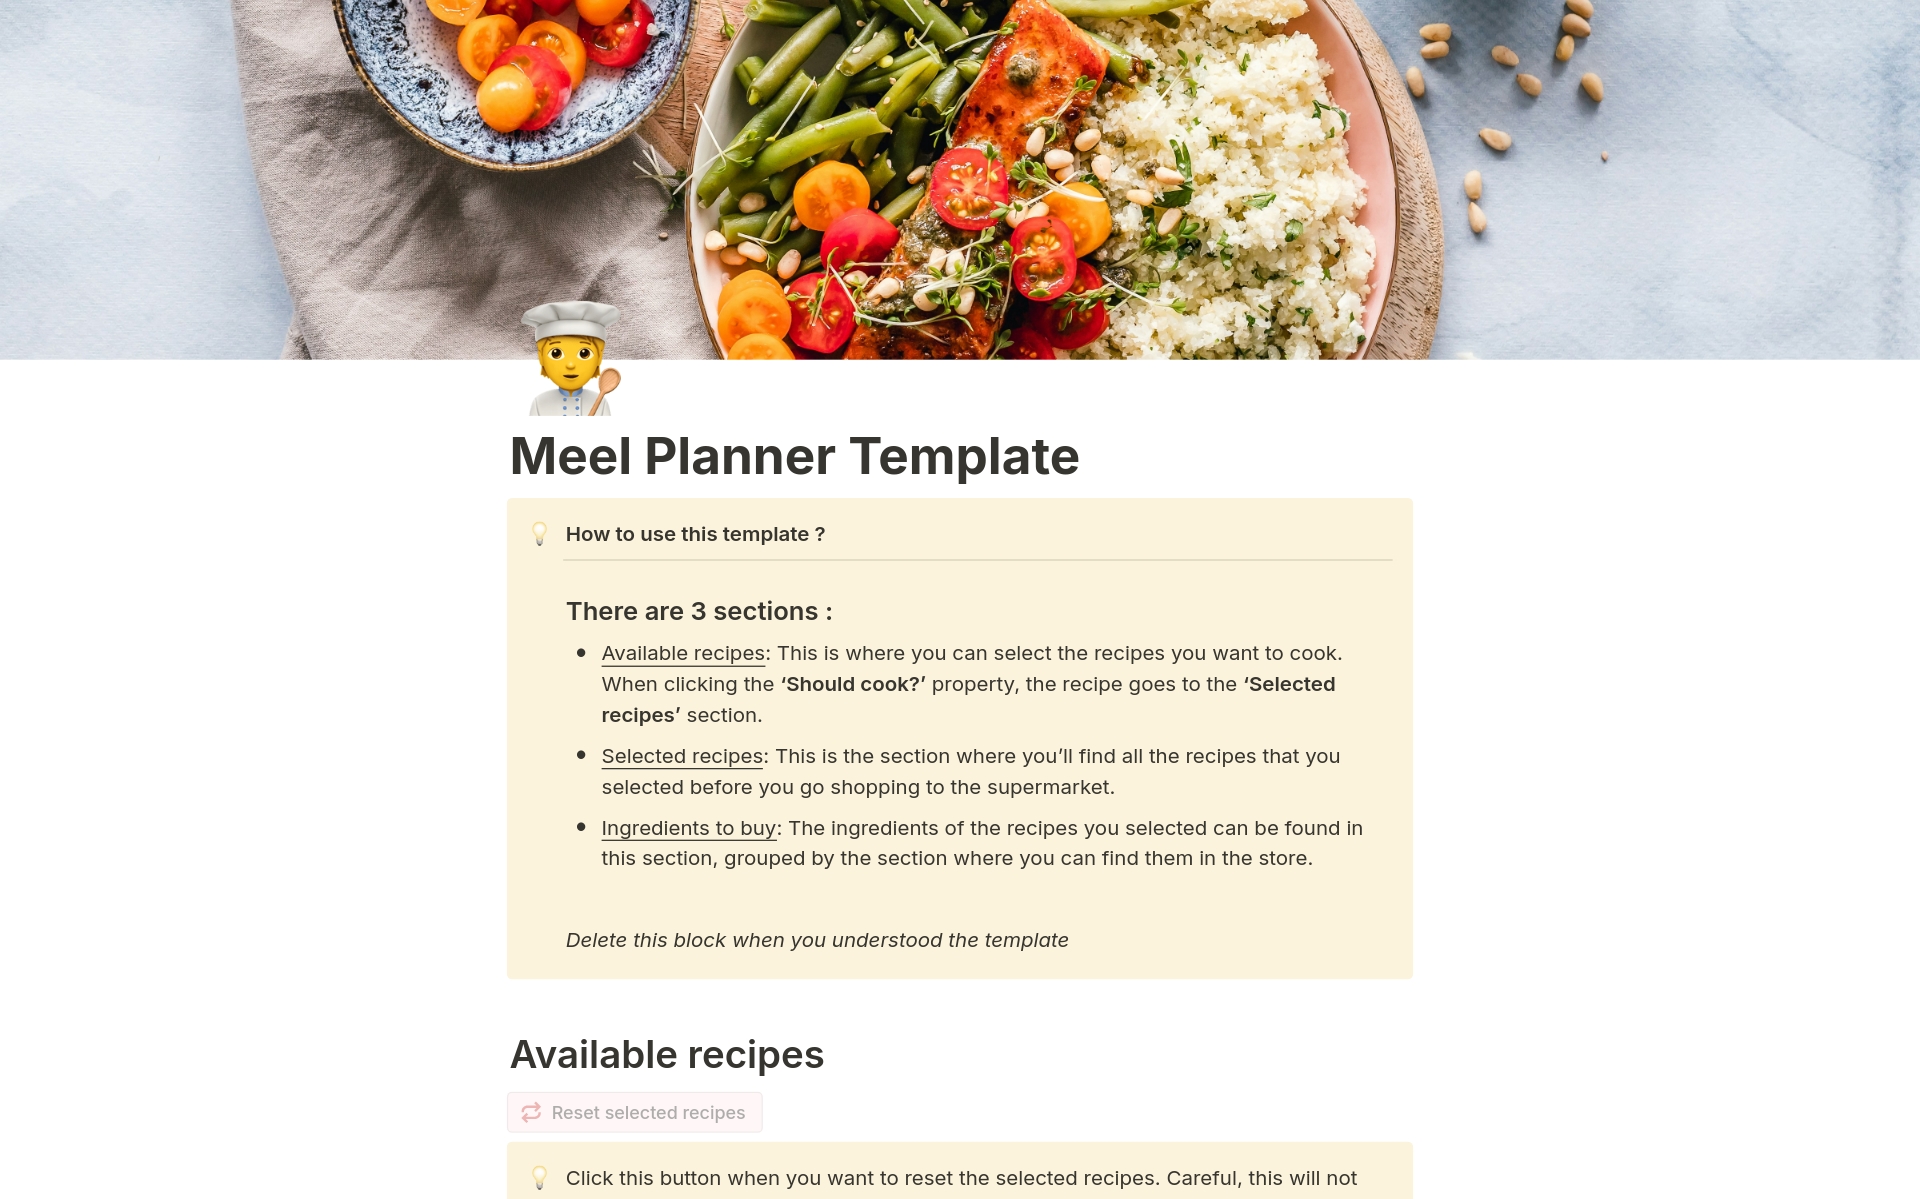 Plan the recipes you want to cook before shopping in the supermarket. This will save you some time !